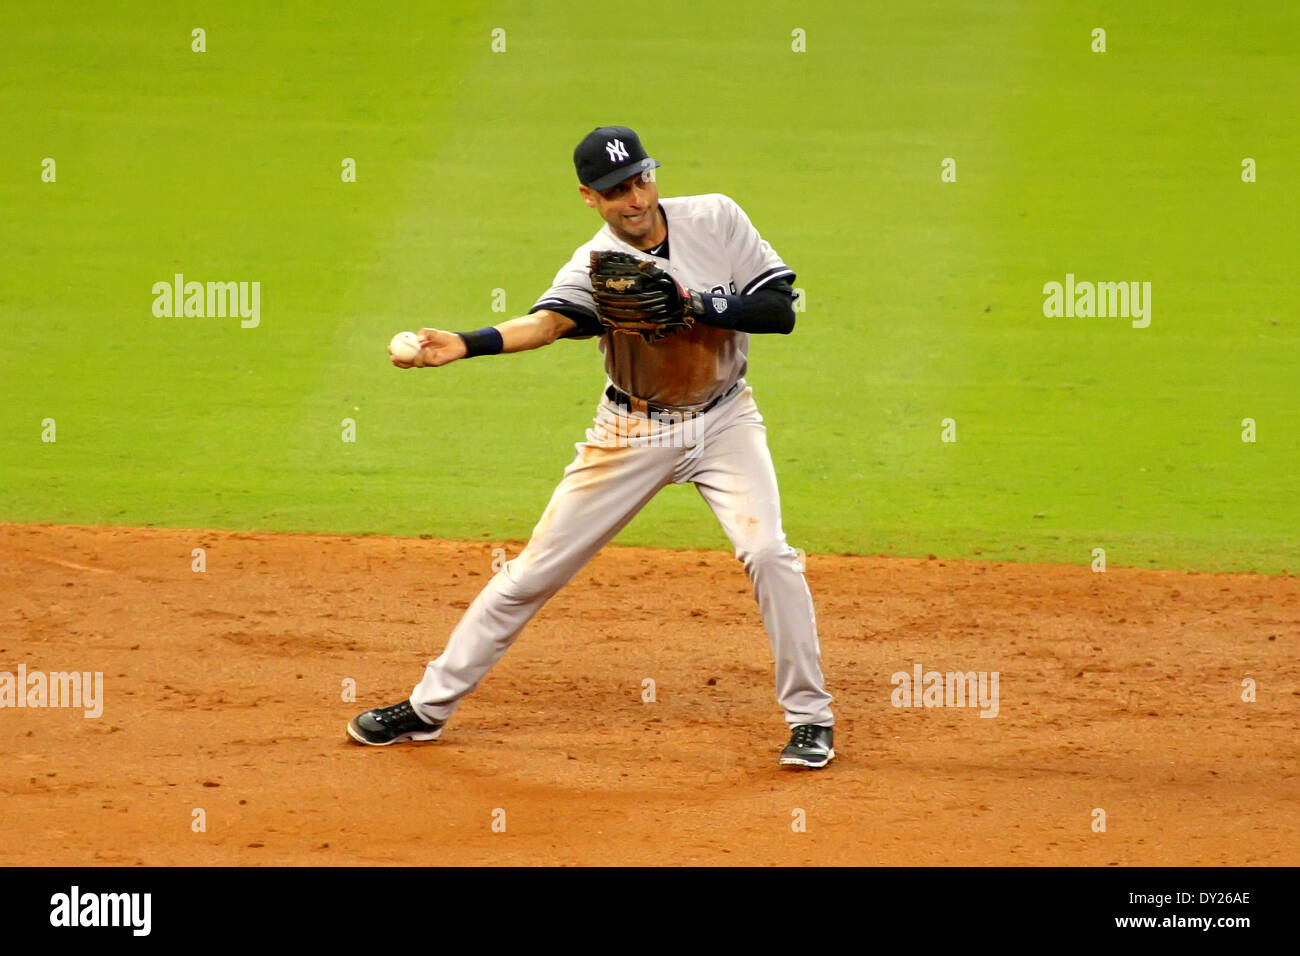 Houston, Texas, USA. 3rd Apr, 2014. APR 03 2014: New York Yankees shortstop Derek Jeter #2 throws a fielded ball to second base for an out (part of a double play) during the MLB baseball game between the Houston Astros and the New York Yankees from Minute Maid Park in Houston, TX. Credit:  csm/Alamy Live News Stock Photo